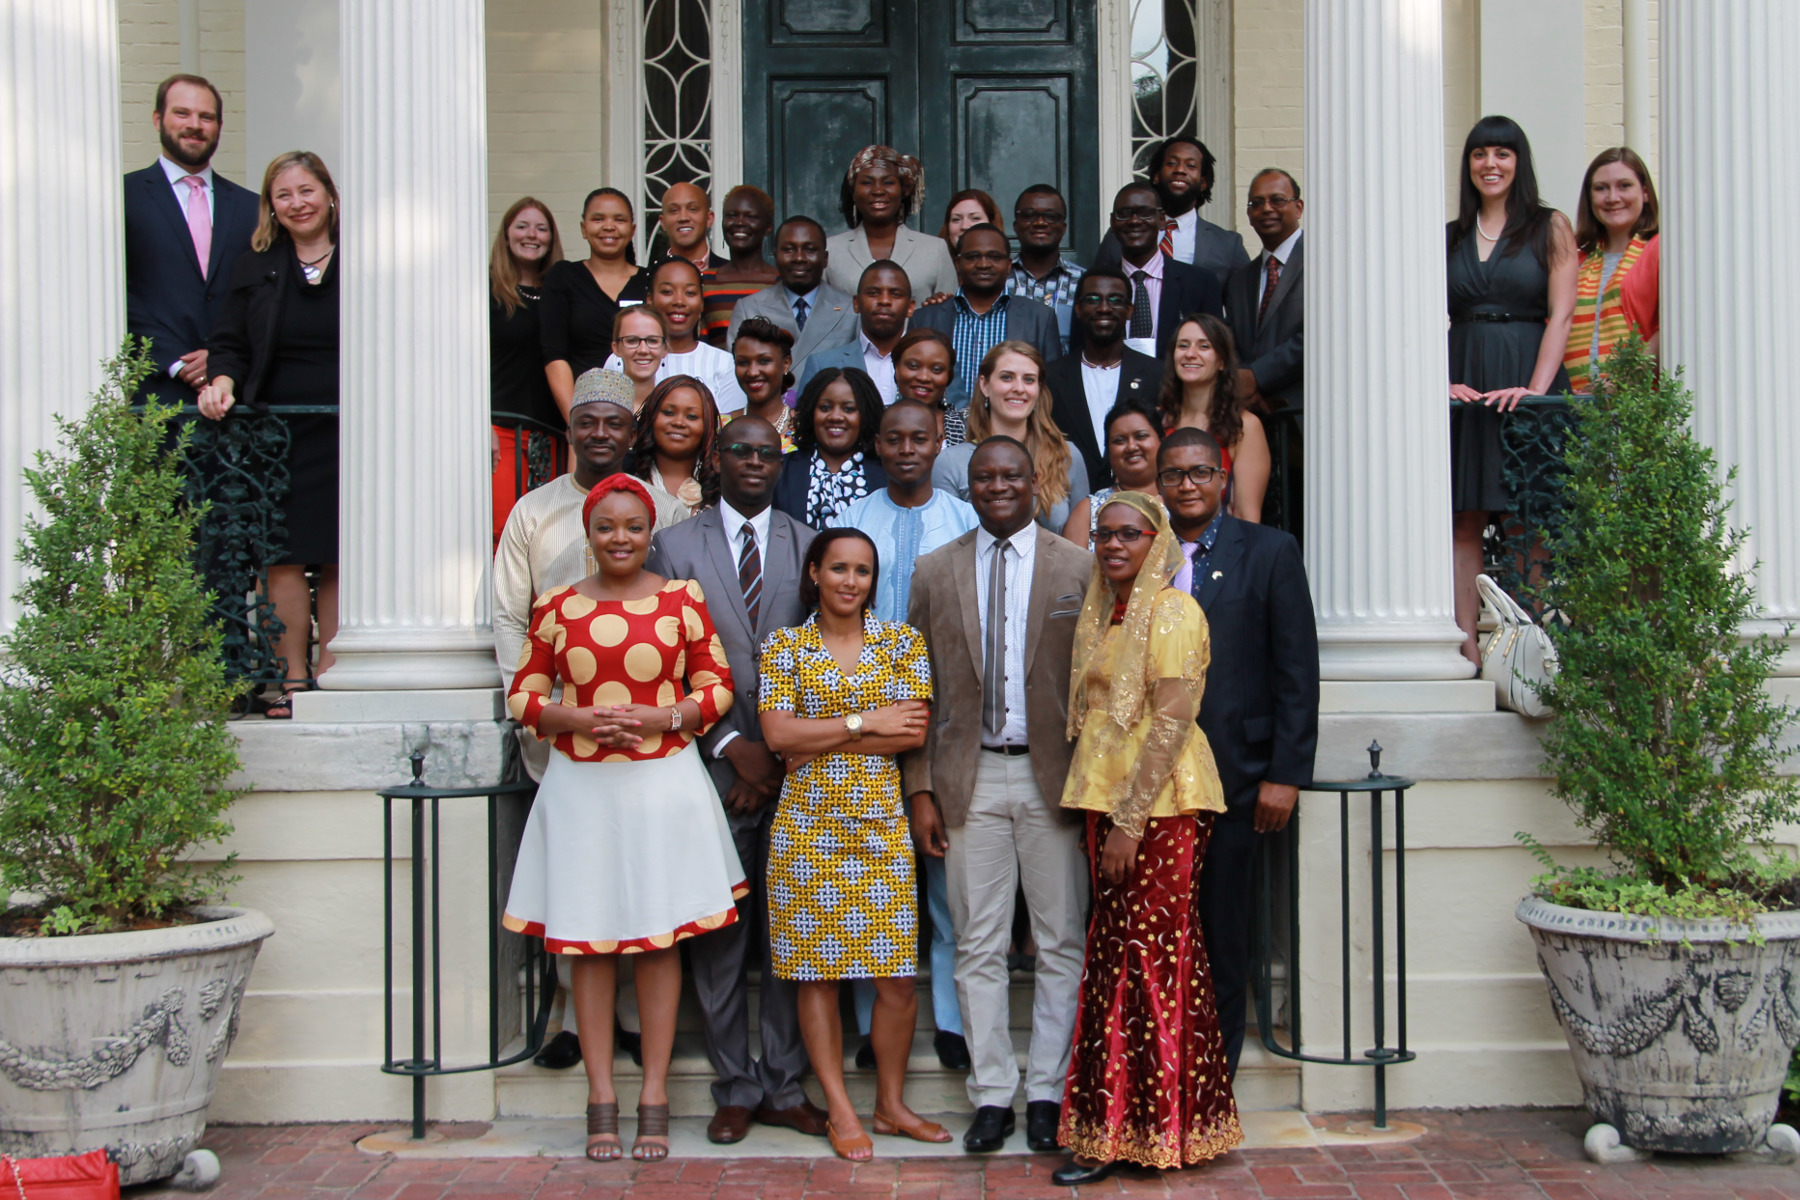 Participants in the 2015 Mandela Washington Fellows program gather for a photo on the steps of the Virginia Executive Mansion on June 30.